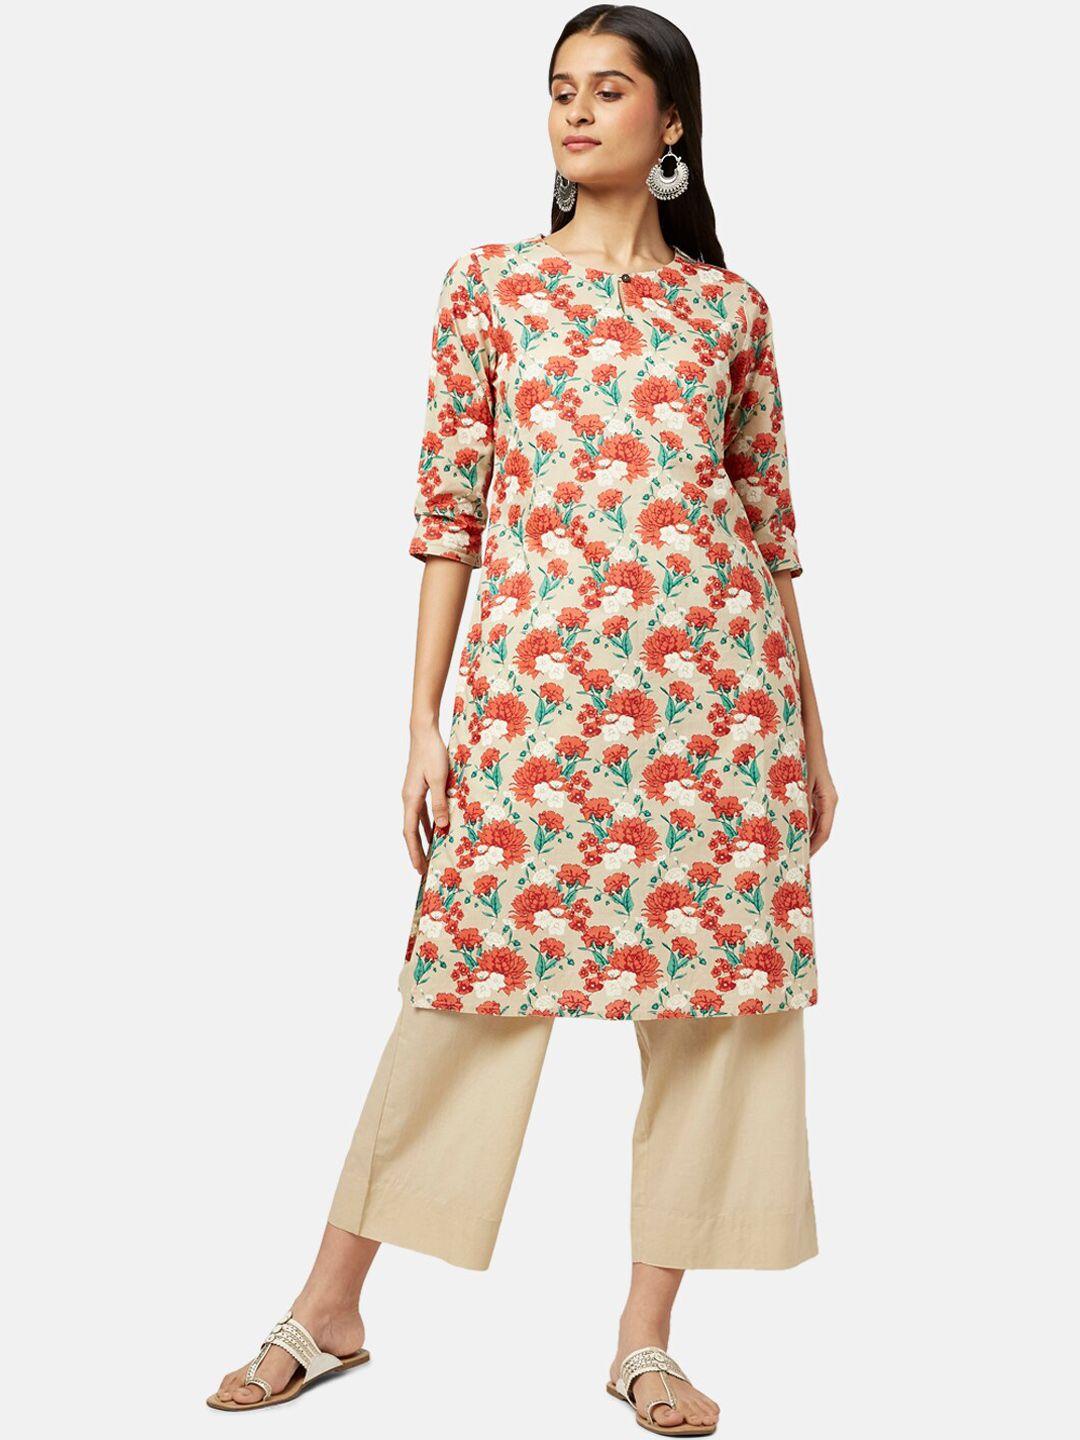 rangmanch by pantaloons women beige floral printed pure cotton kurta with trousers